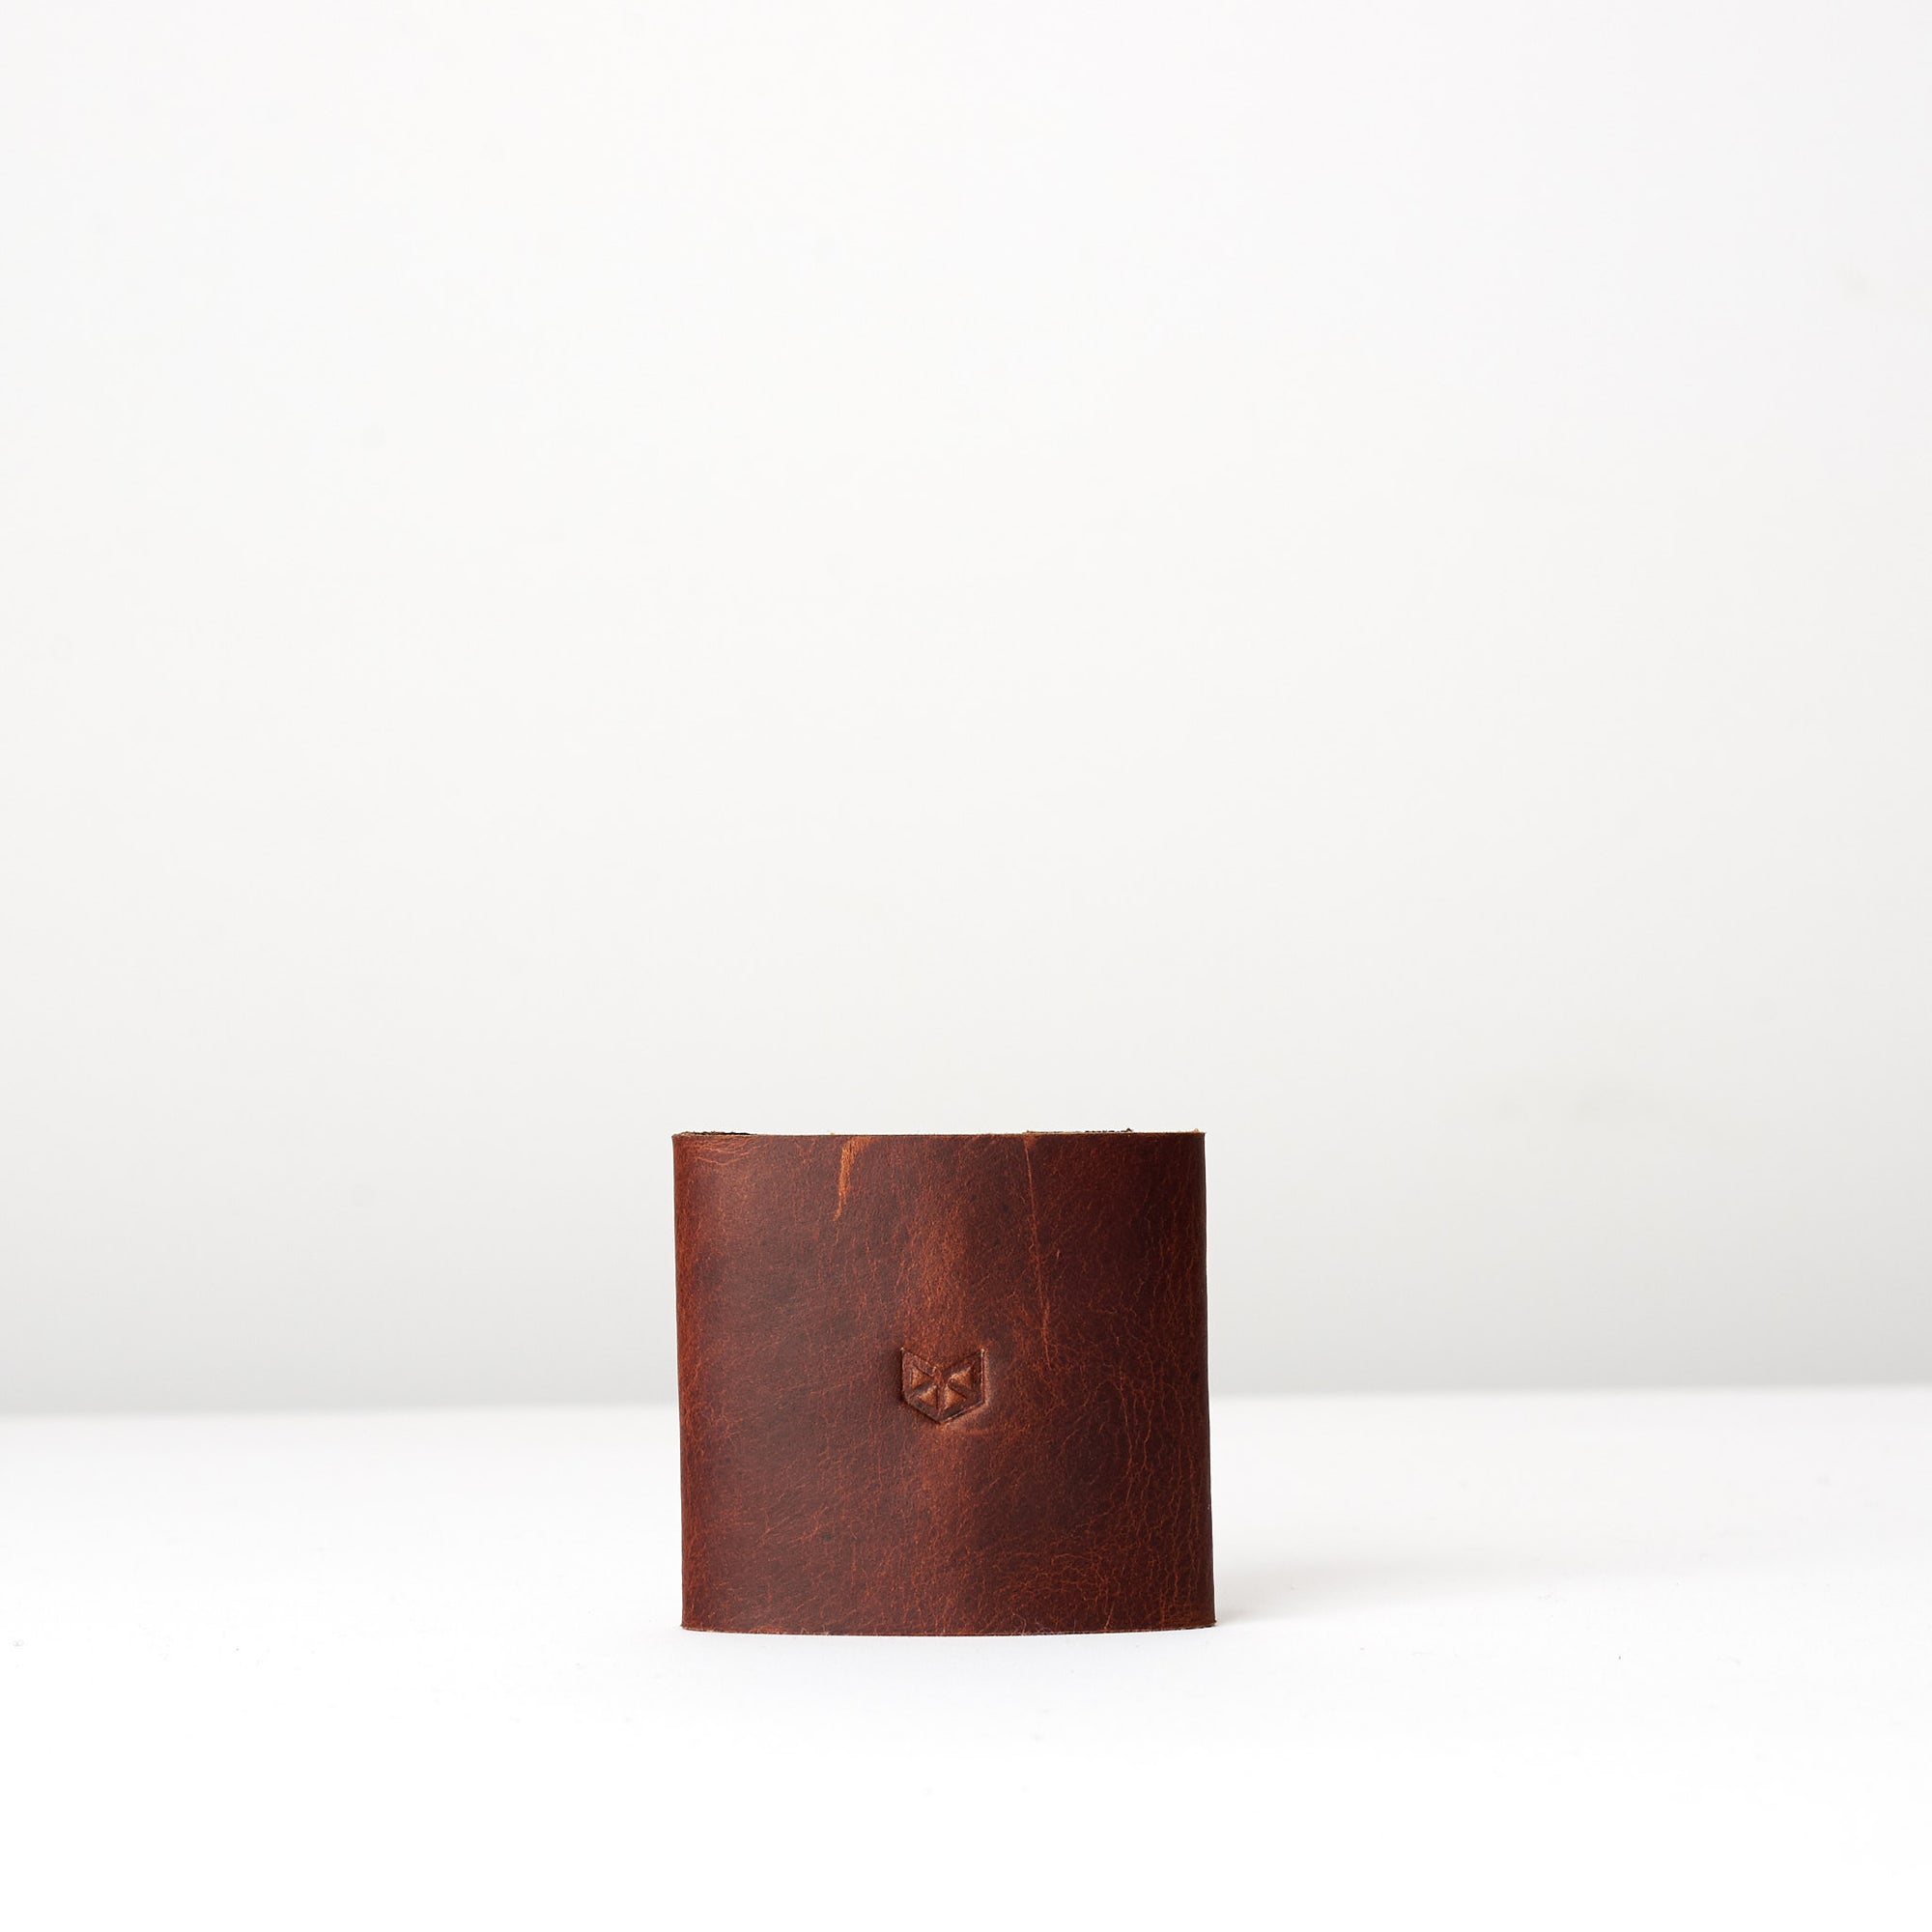 Minimal cardholder. Leather sandstone slim wallet gifts for men handmade accessories. minimalist full grain leather thin wallet. Made by Capra Leather. 